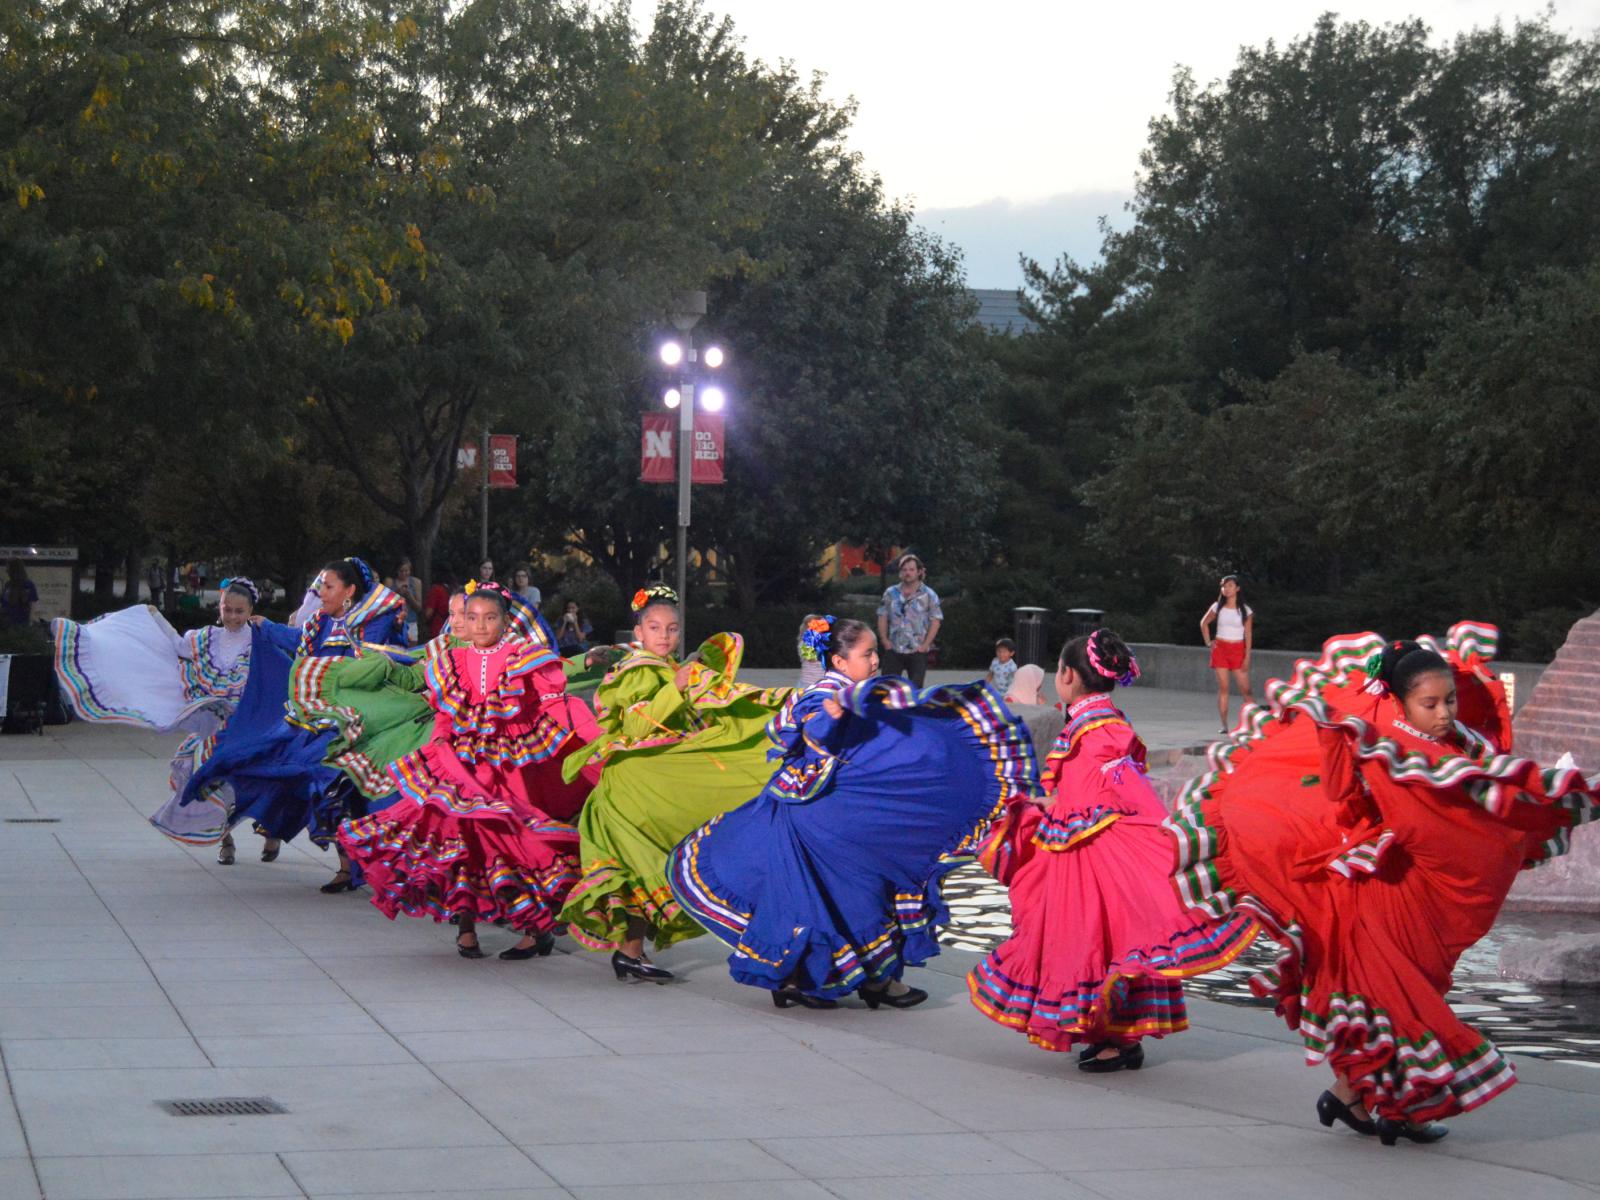 Little girls perform Folklorico dancing at Fiesta on the Green at the University of Nebraska-Lincoln.